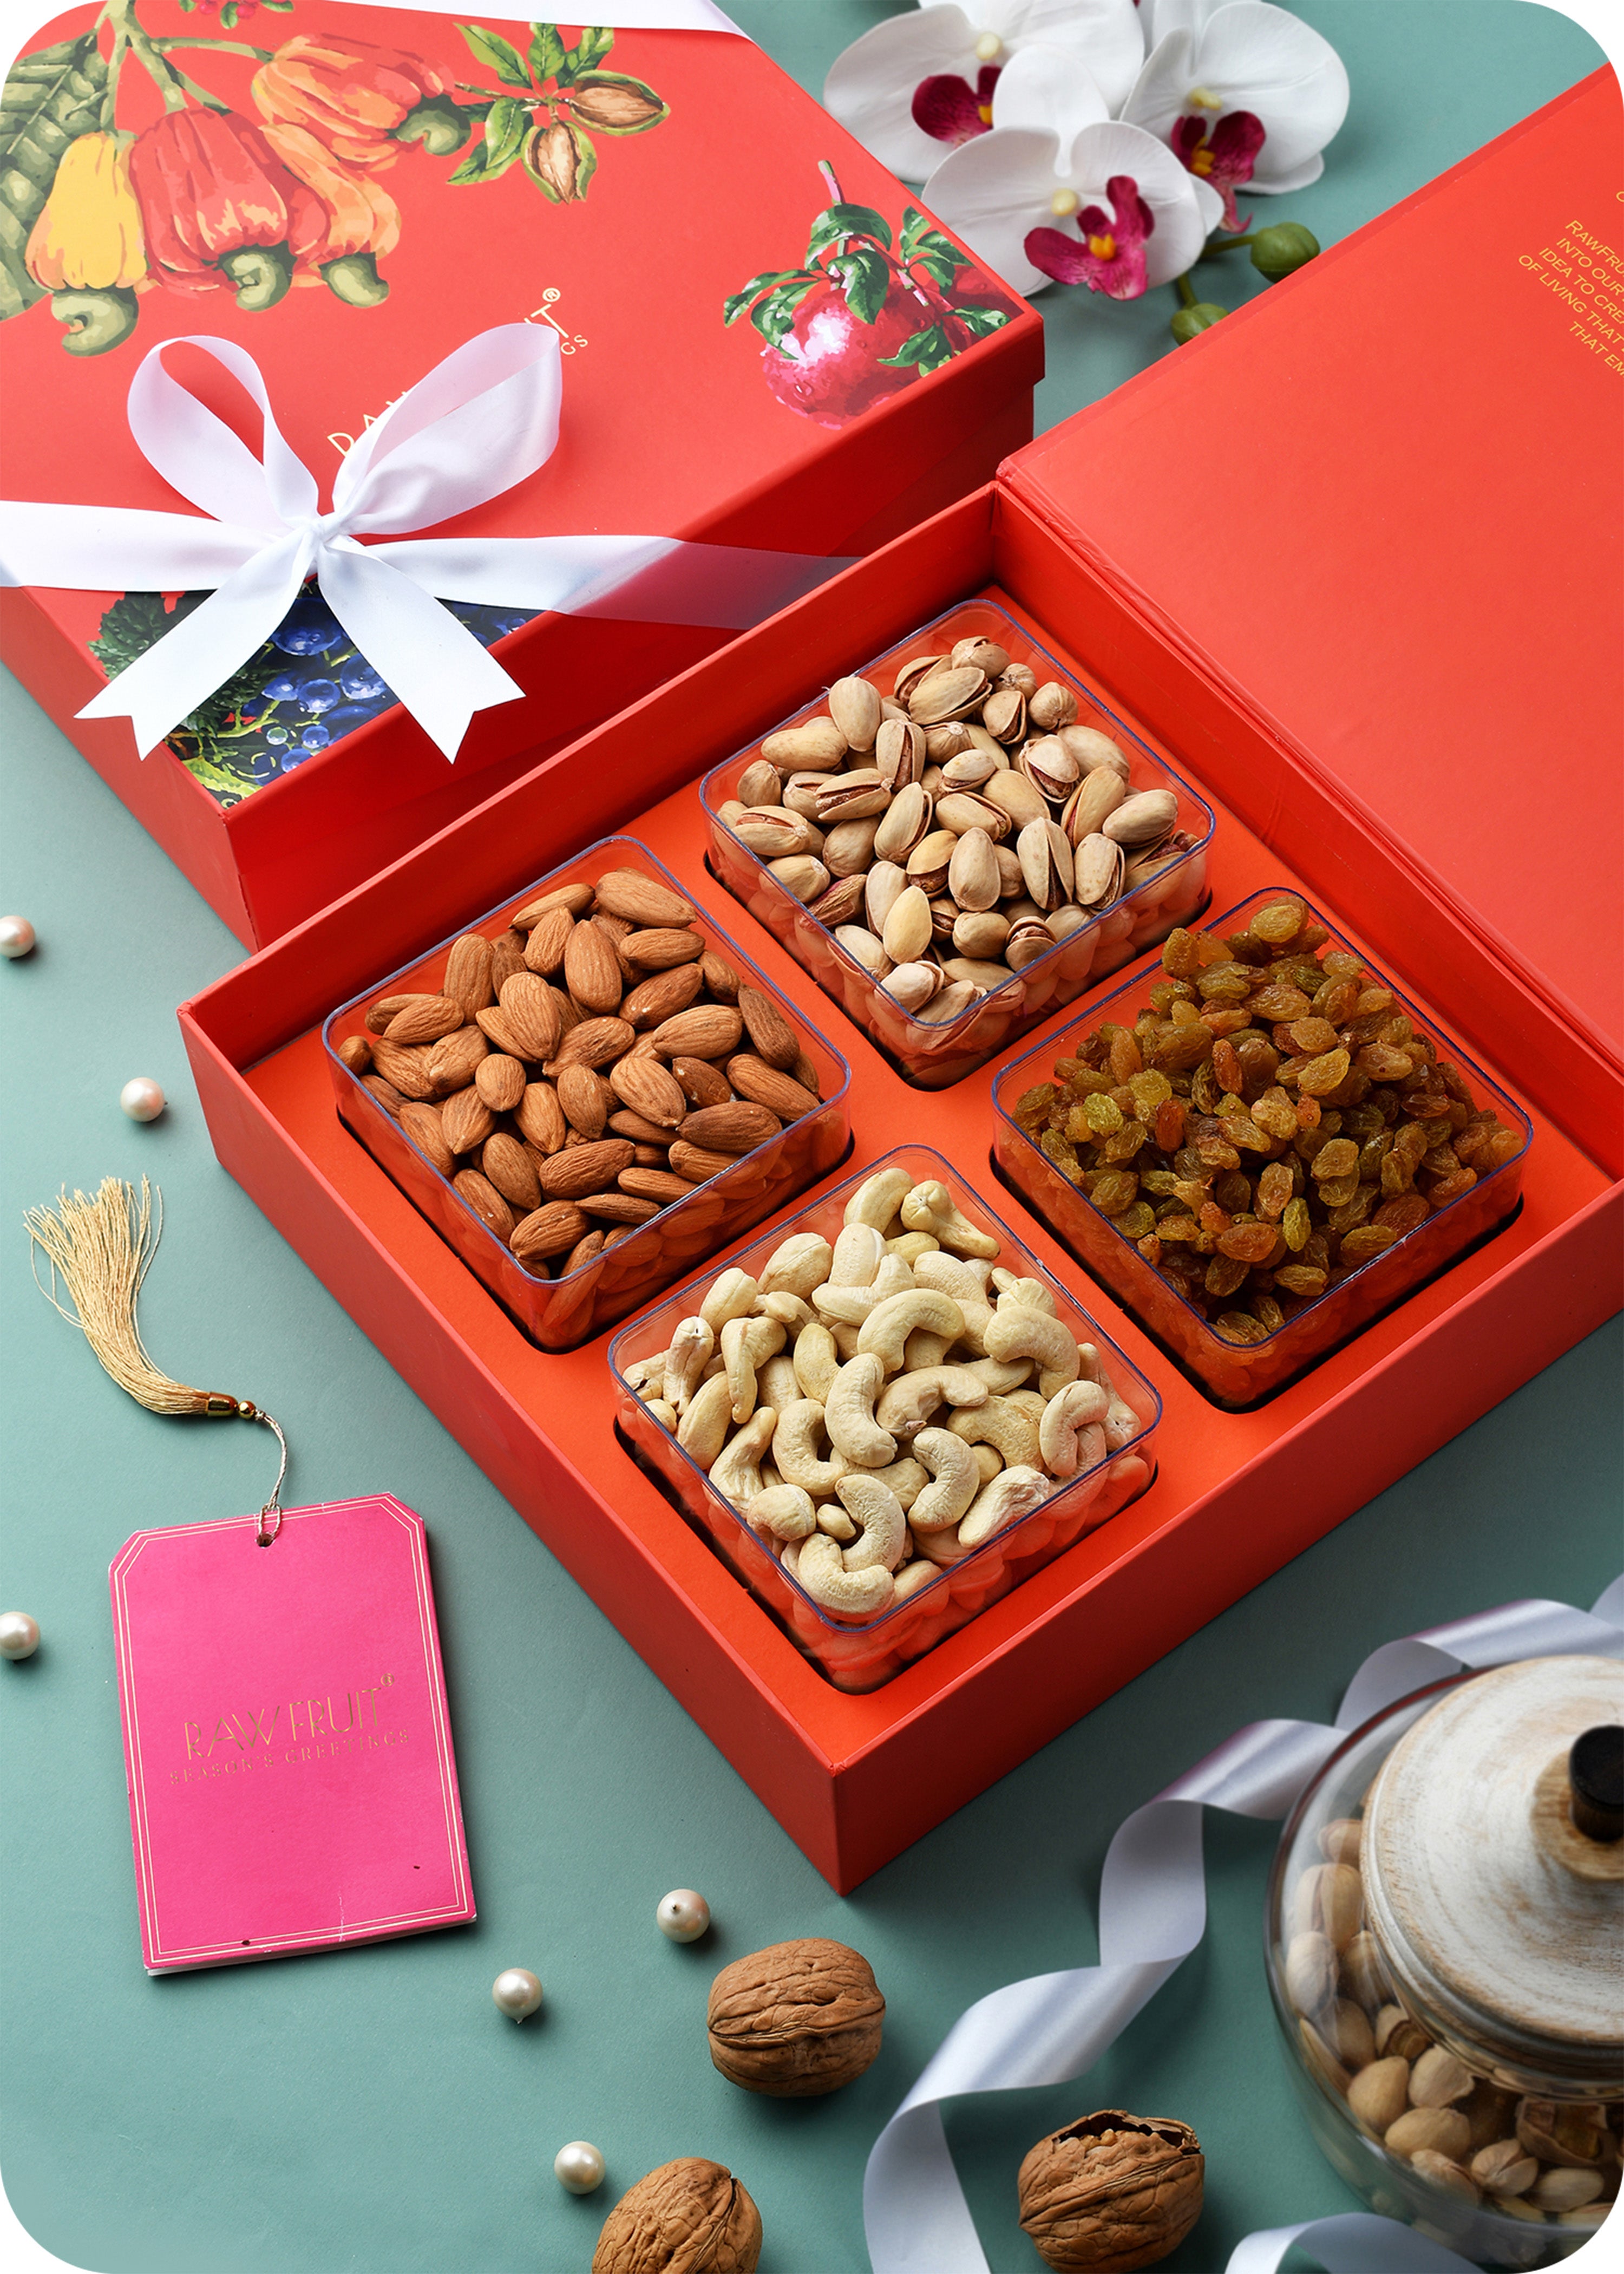 PRIDE STORE Diwali Dry Fruits Gift Pack, 300gm [Cashew, Almond, Walnuts and  Raisins] - Healthy & Perfect Gift Hamper for Every Occasion | | Diwali Dry  Fruits Gift Hampers Pack | Diwali Festival Celebration | Deepawali Gift  Pack For Family, Friends ...